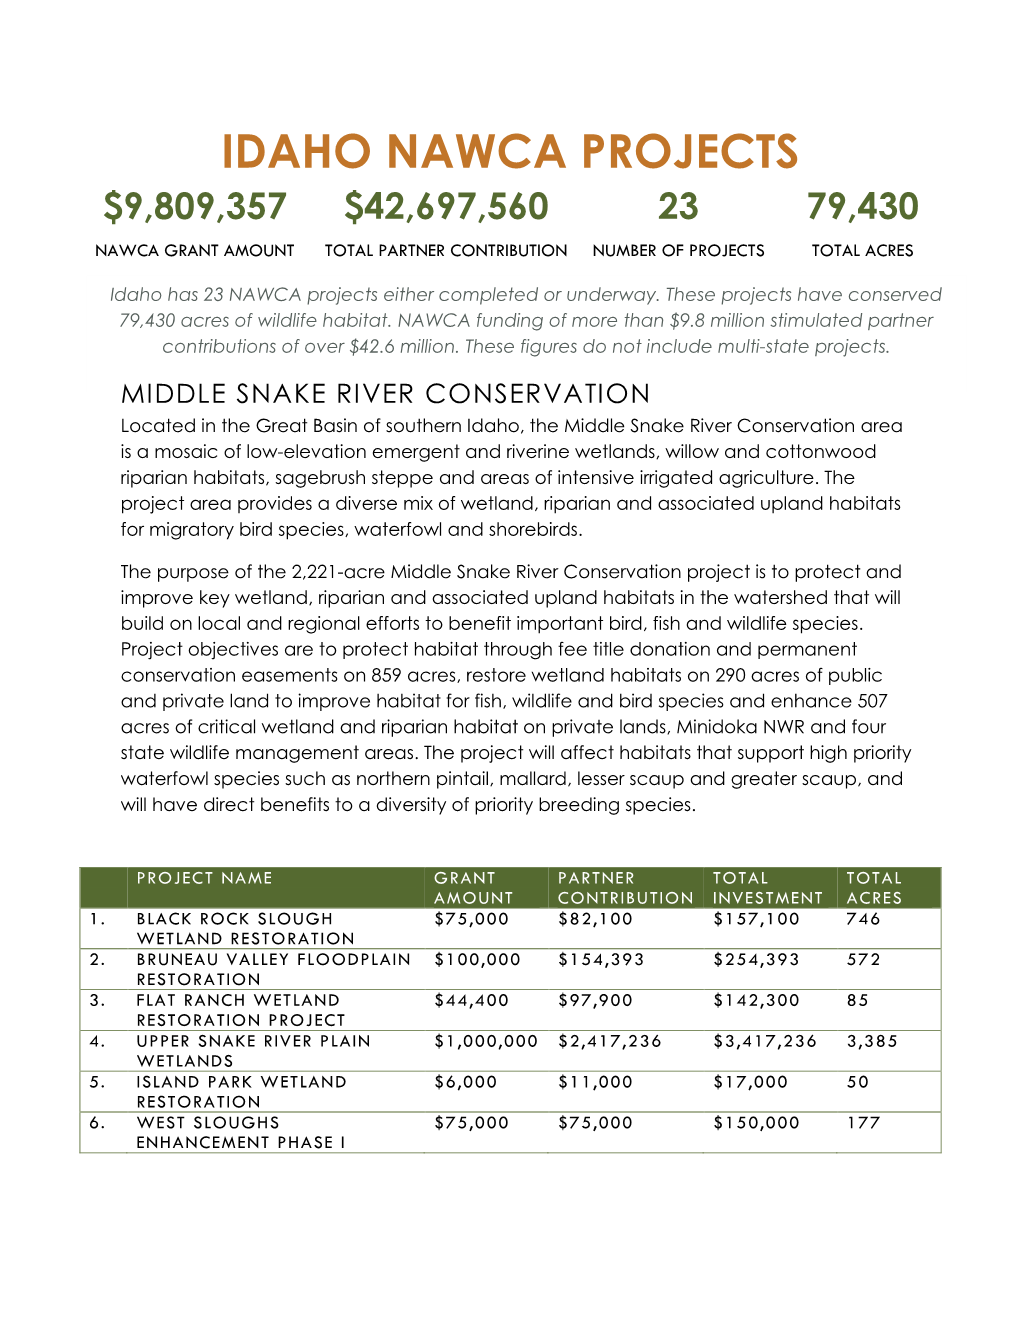 Idaho Nawca Projects $9,809,357 $42,697,560 23 79,430 Nawca Grant Amount Total Partner Contribution Number of Projects Total Acres